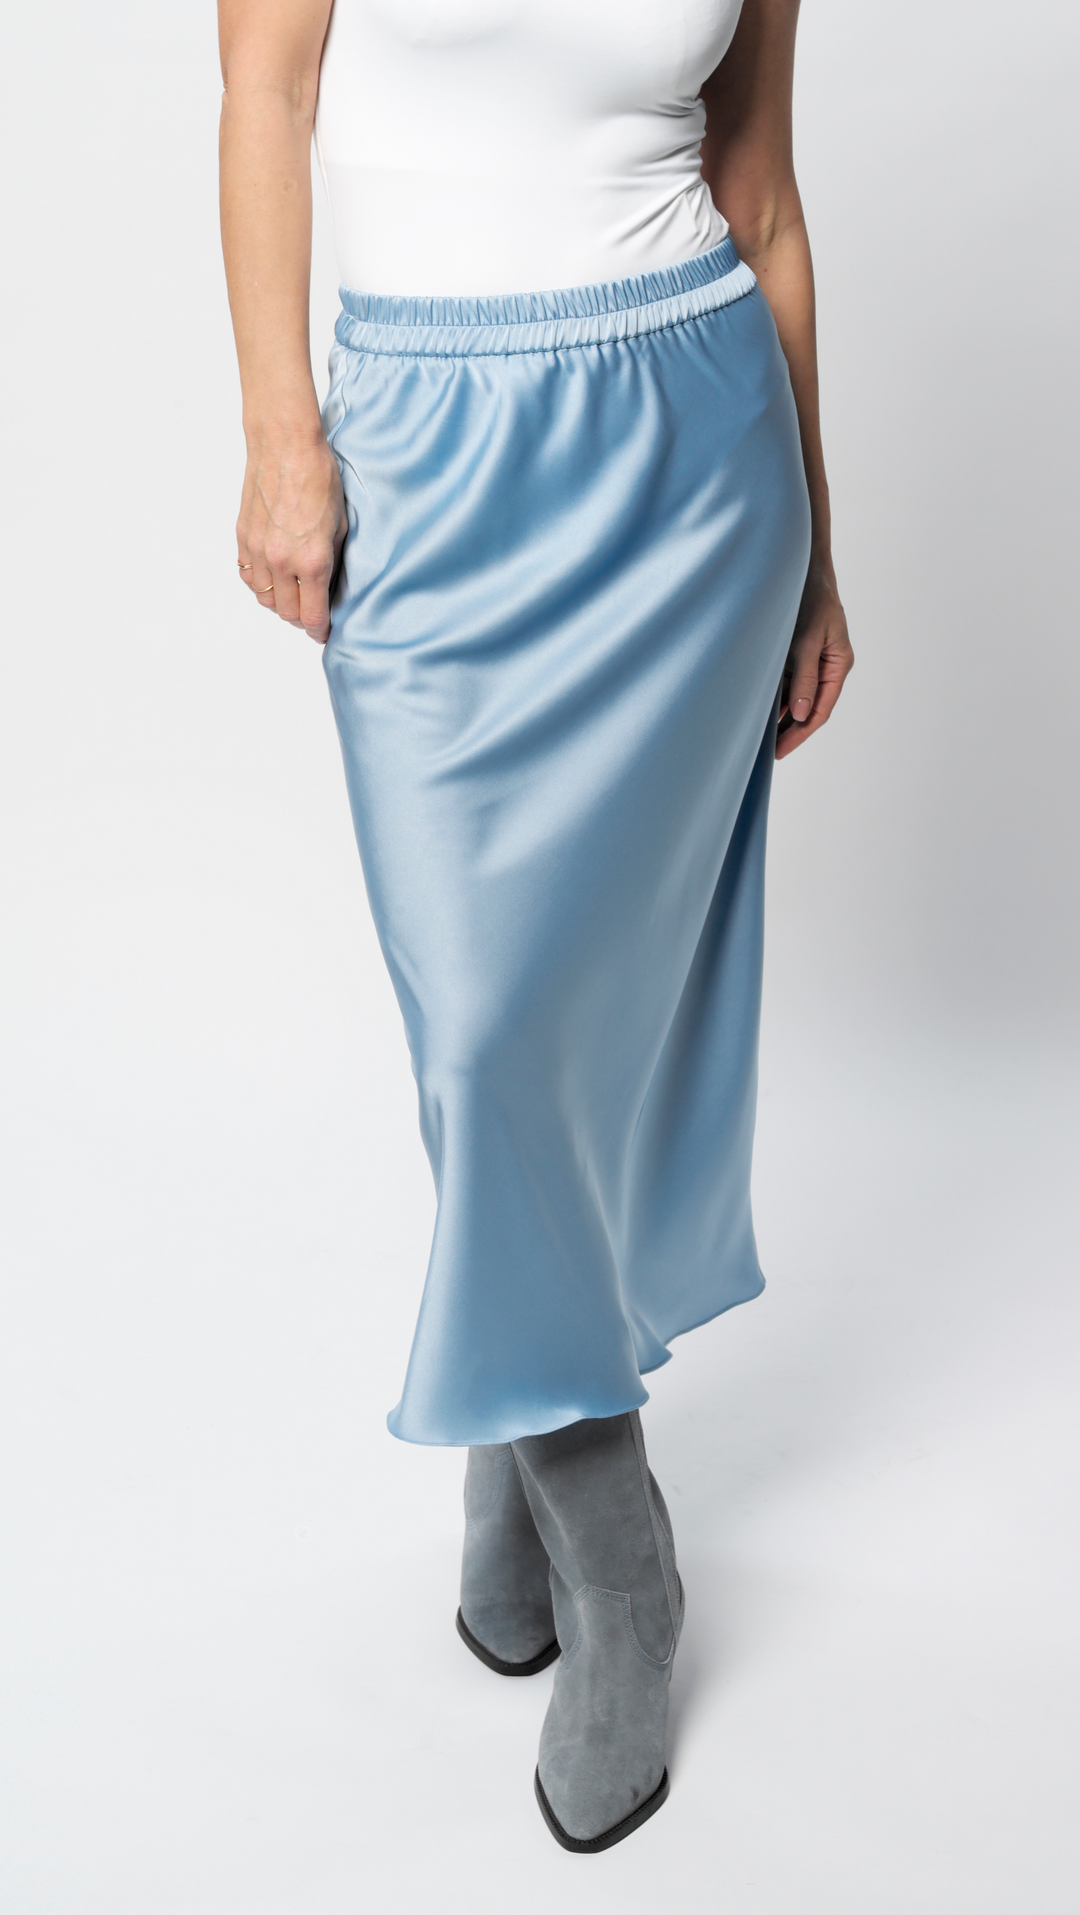 Midi-length skirt "Sky Blue" BeaA - Be At Home with Yourself